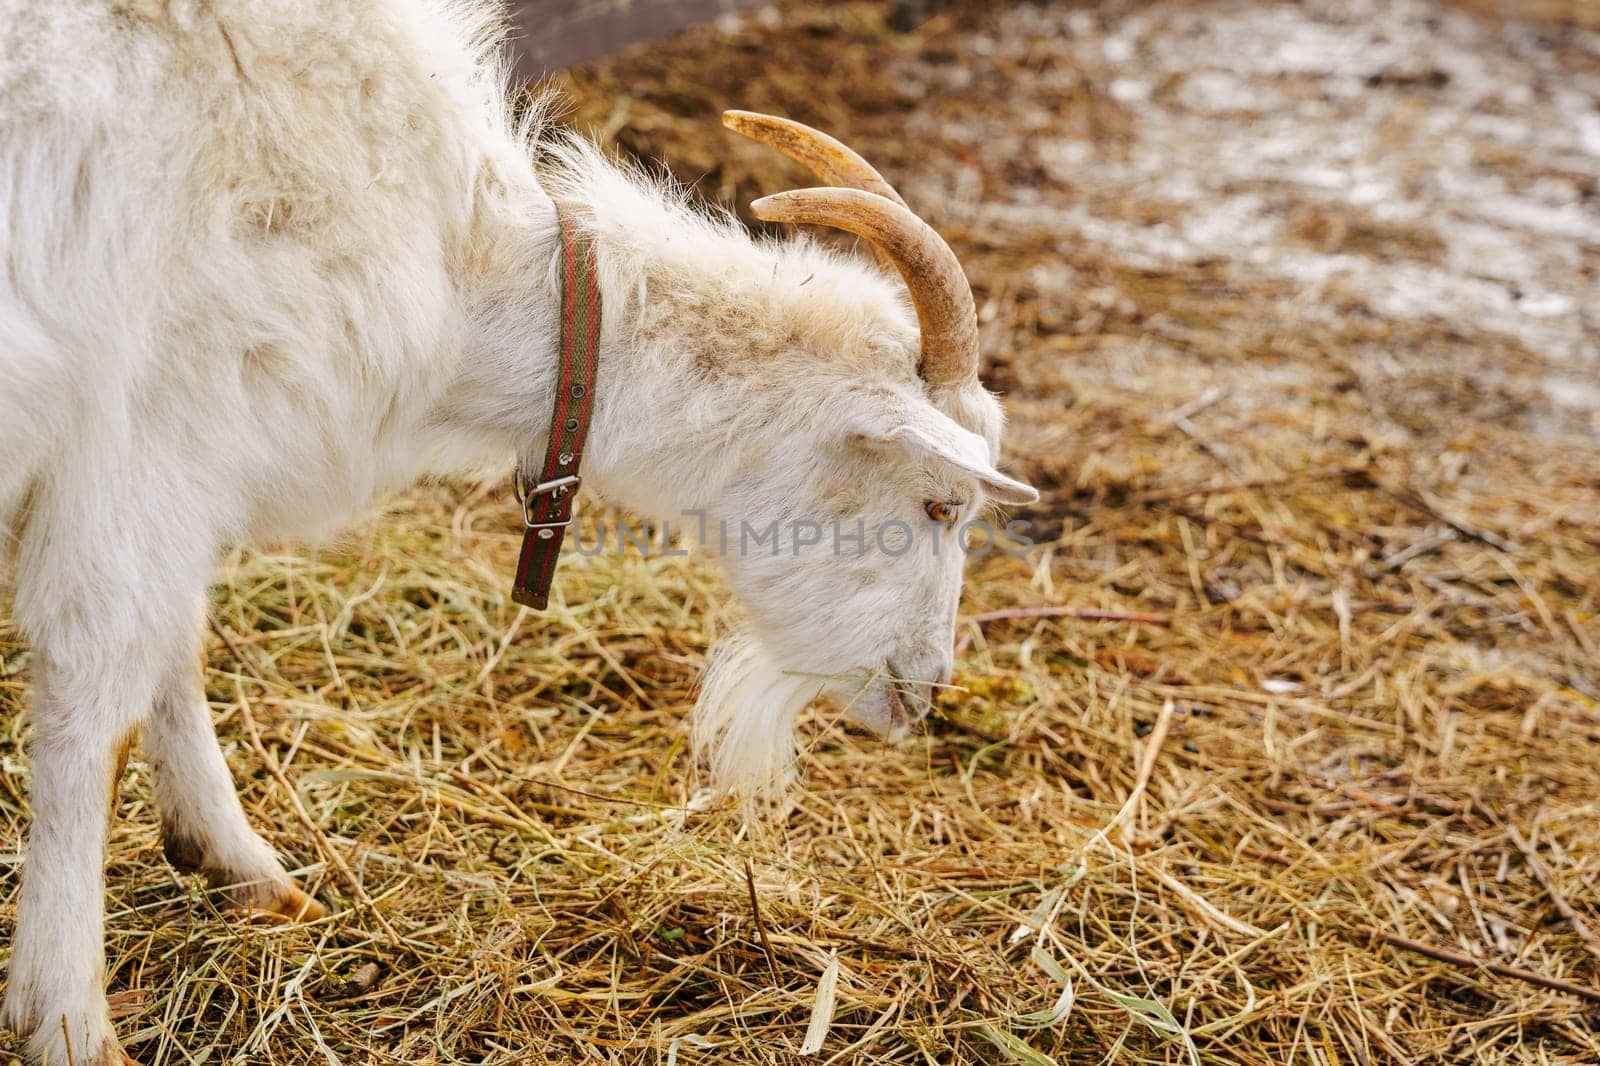 Goats seem at ease, peacefully grazing and exploring their surroundings.